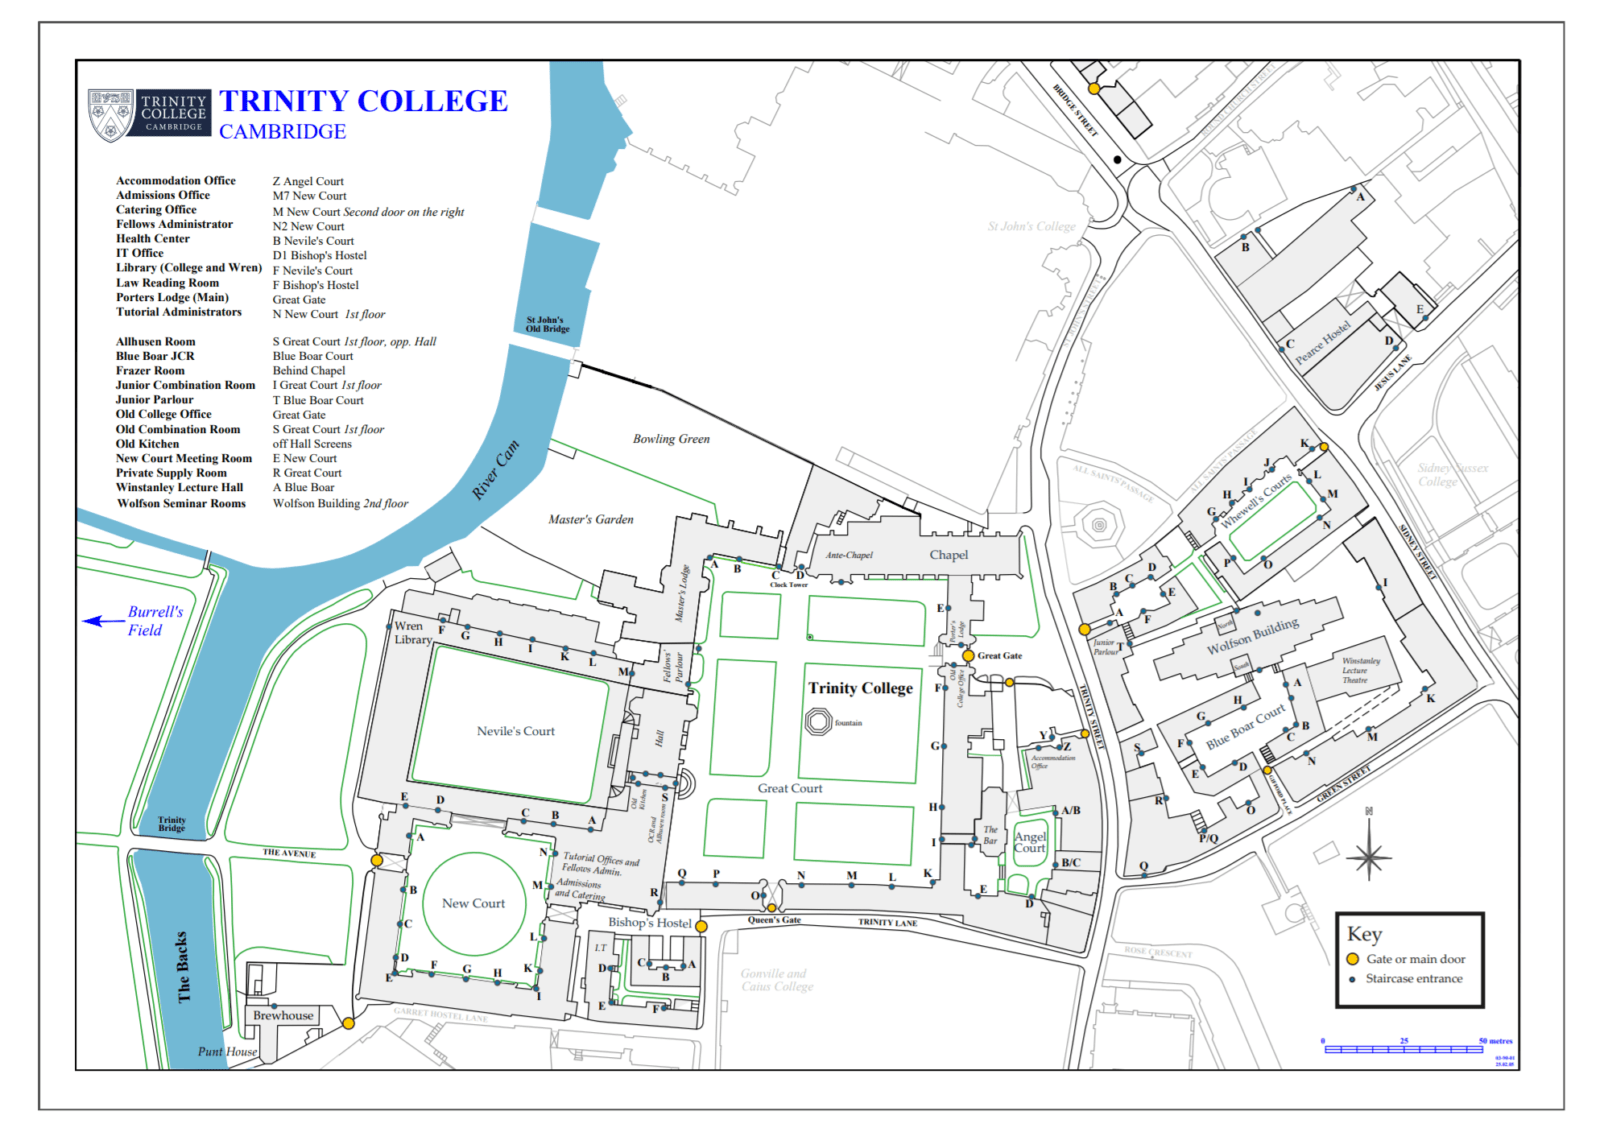 Map of Pearce Hostel, Bridge Street, Whewells Court, Great Court, Angel Court, Bishops Hostel, New Court, Nevile's Court and the Backs